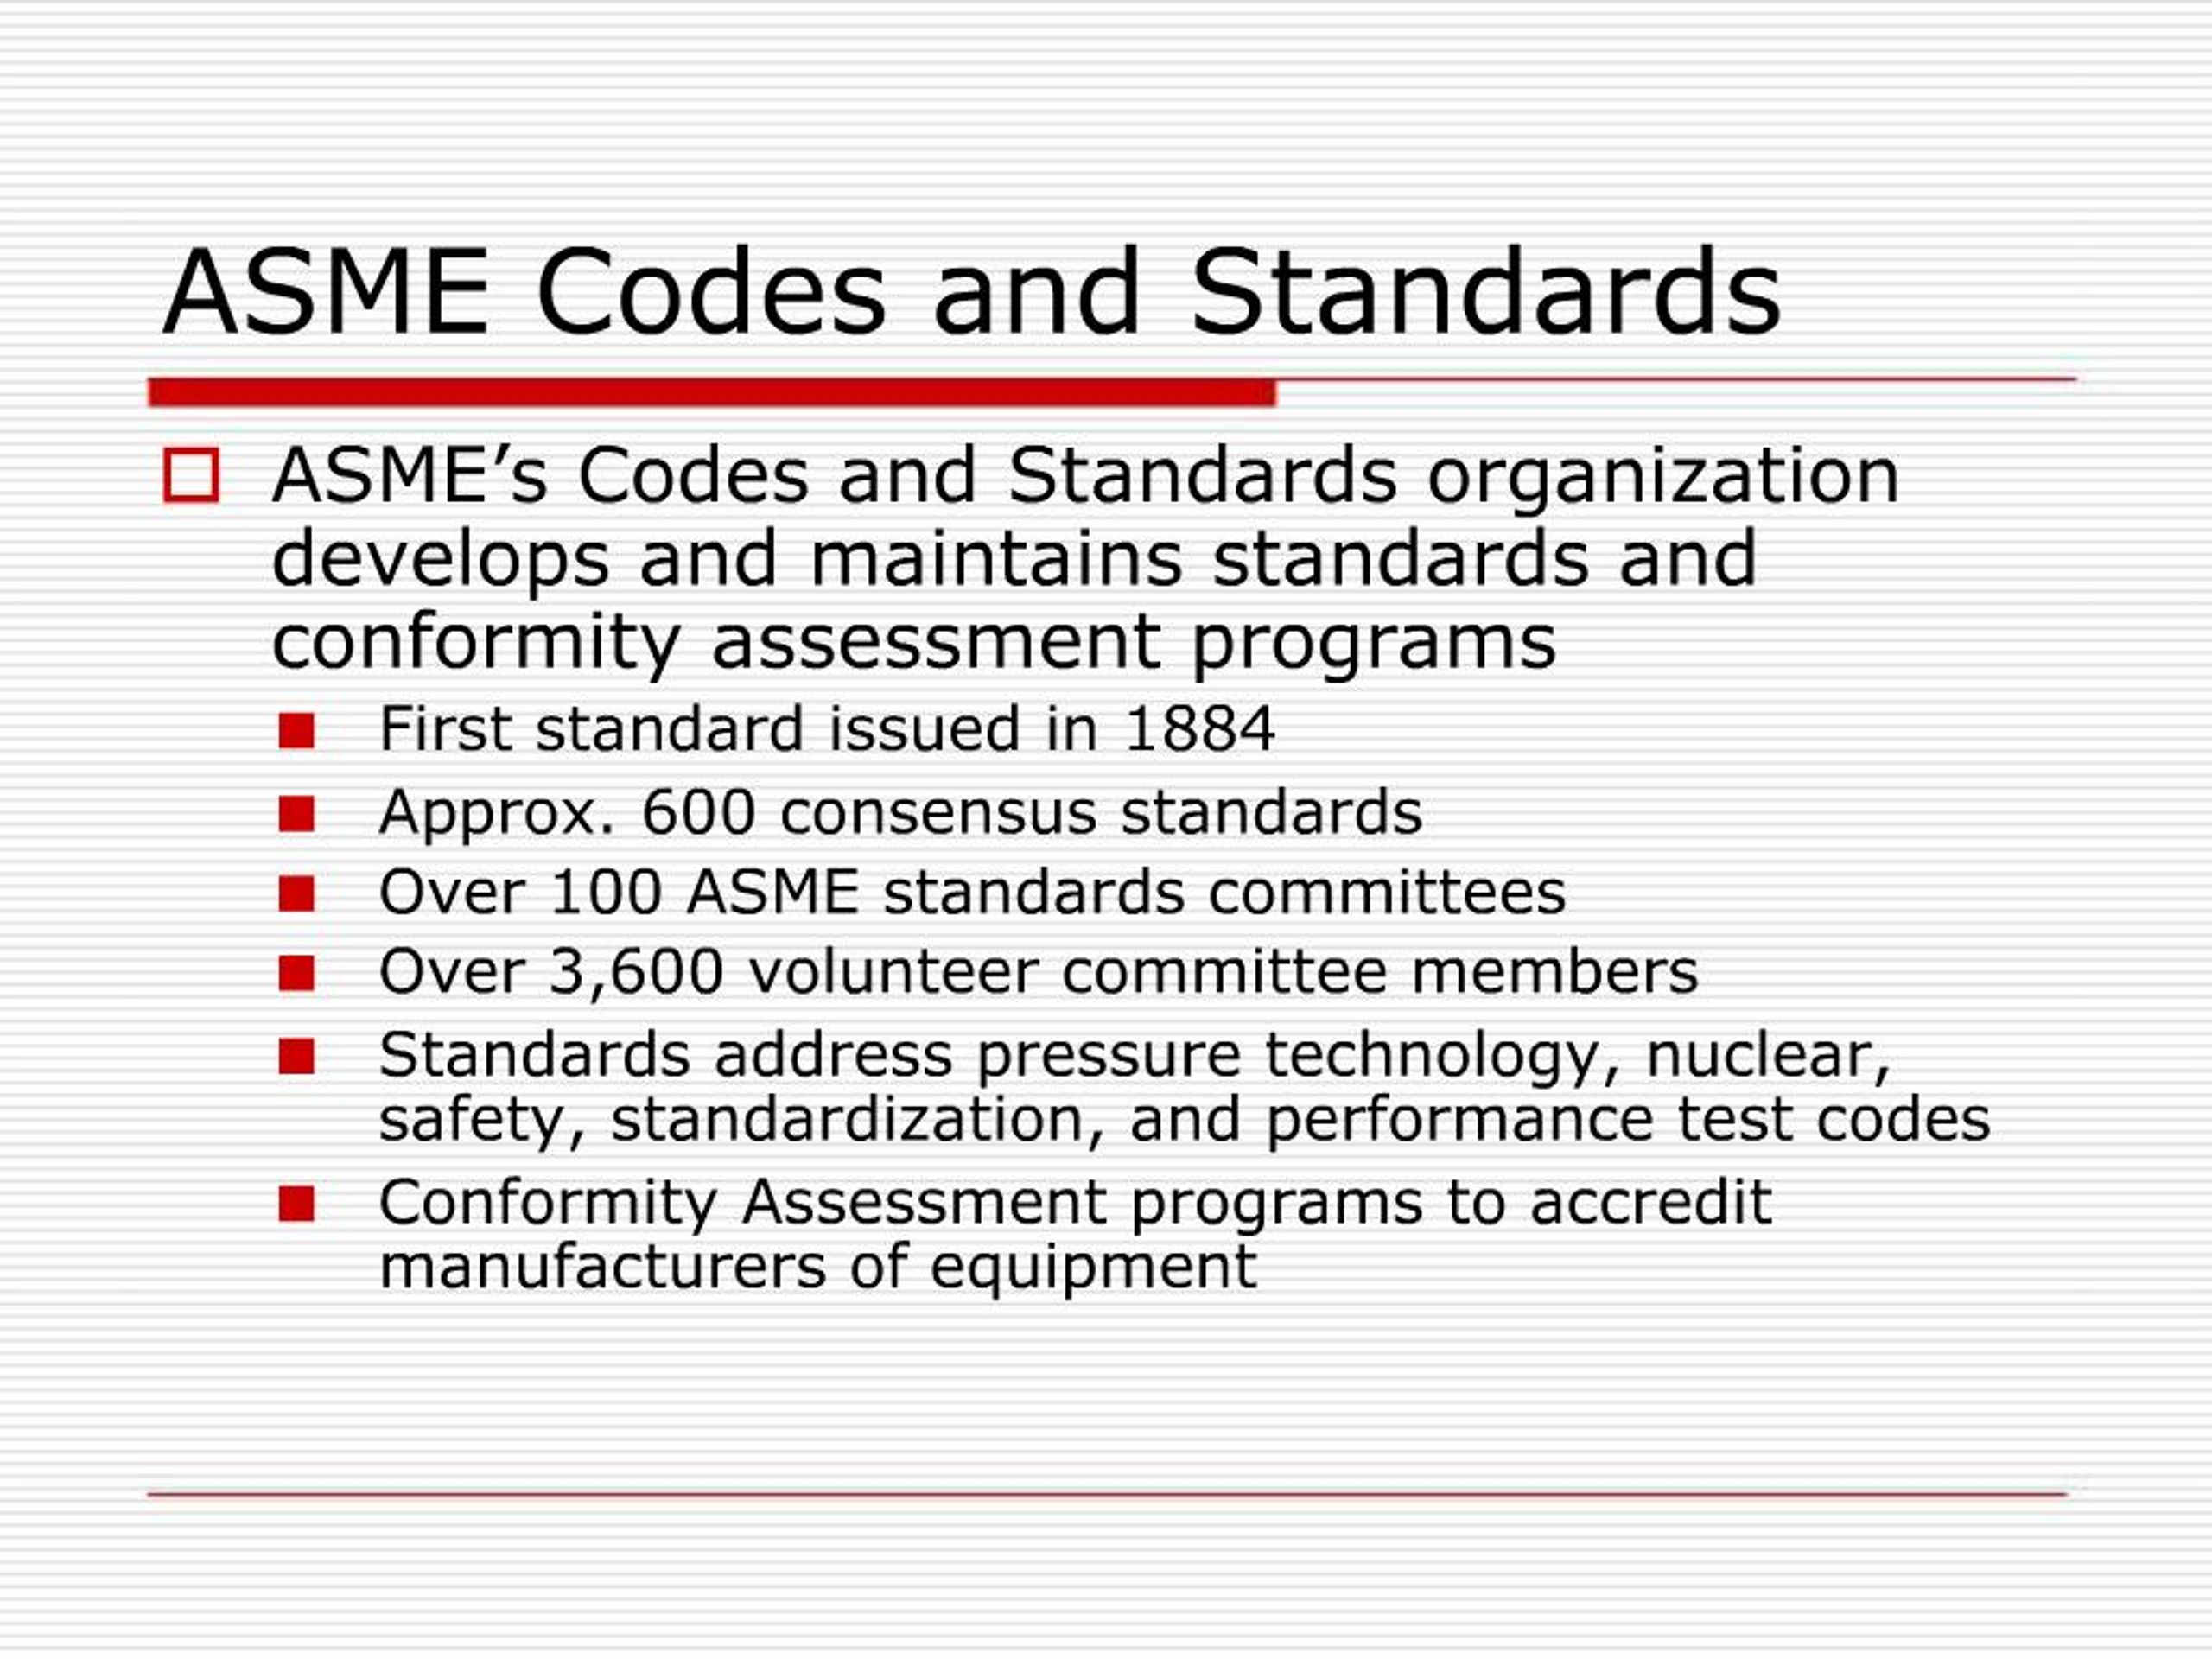 asme codes and standards vi free download